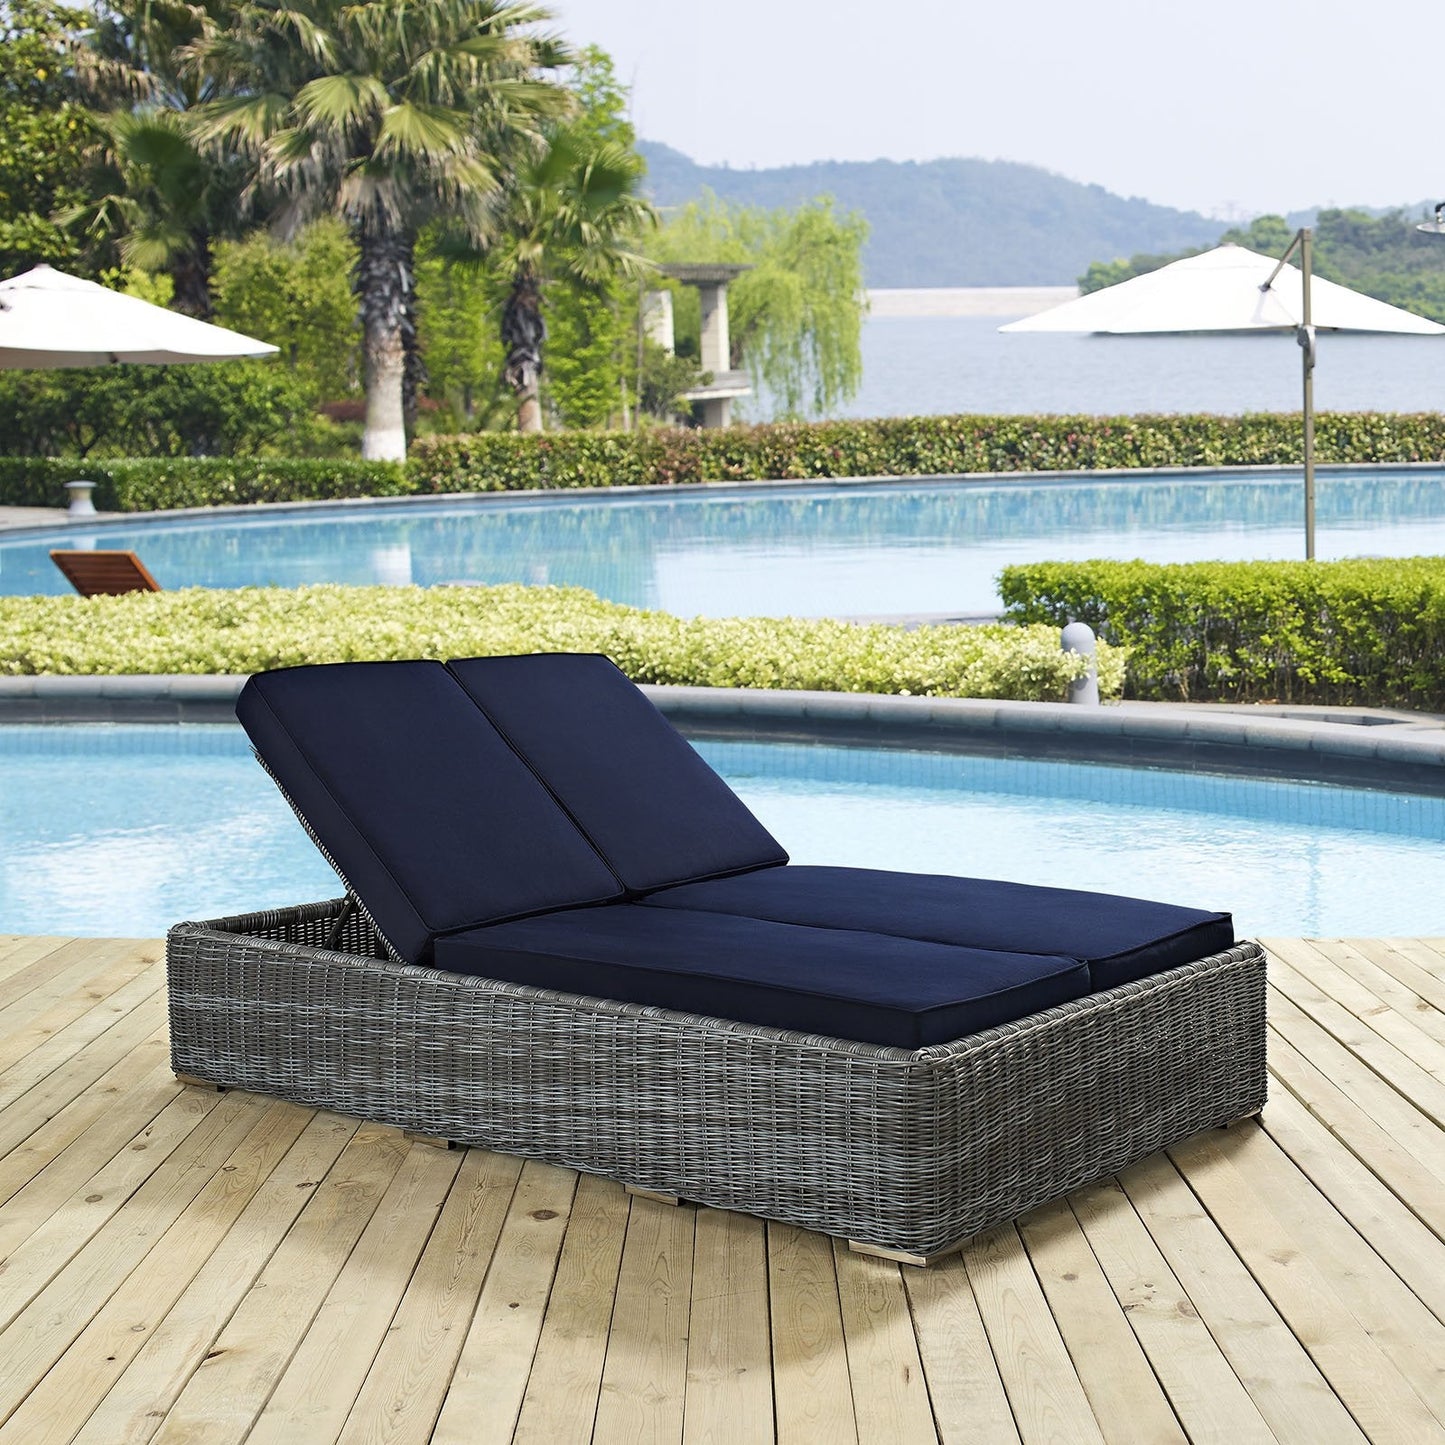 Chaise longue for two persons - 110×180 cm - SHP7